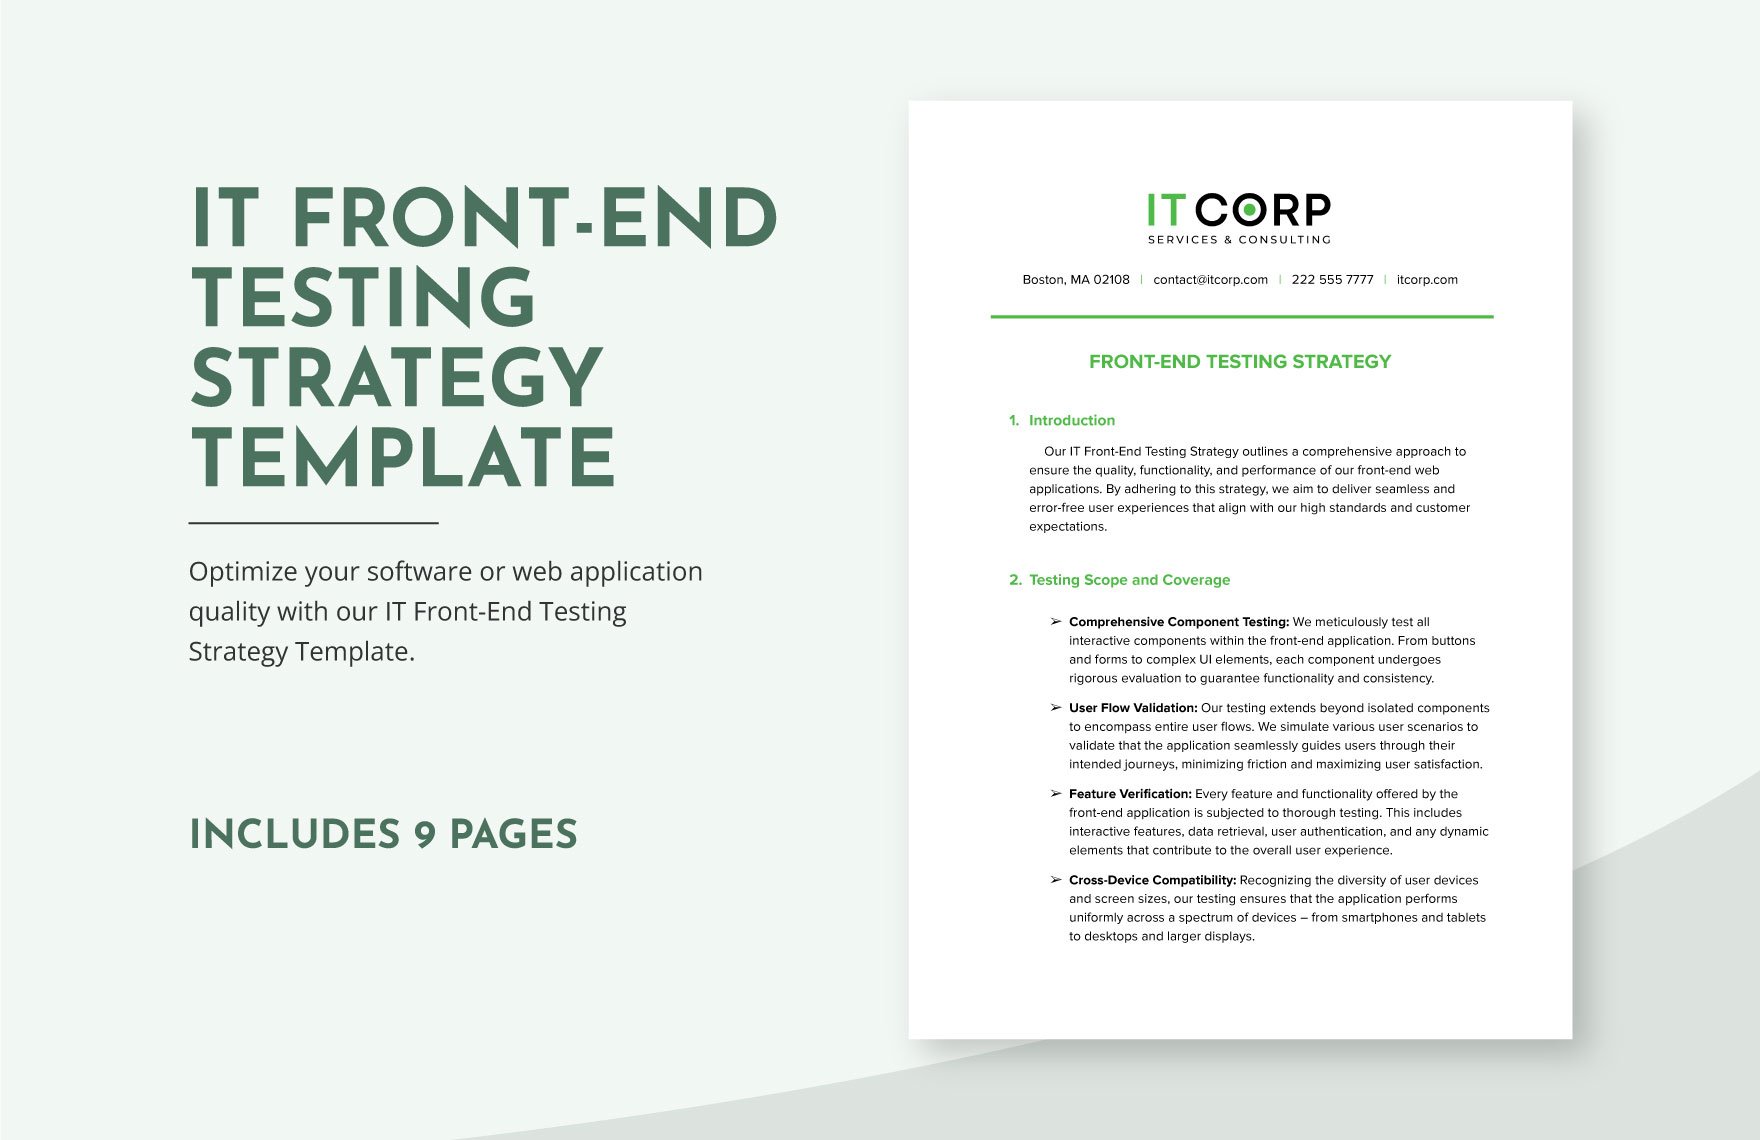 IT Front-End Testing Strategy Template